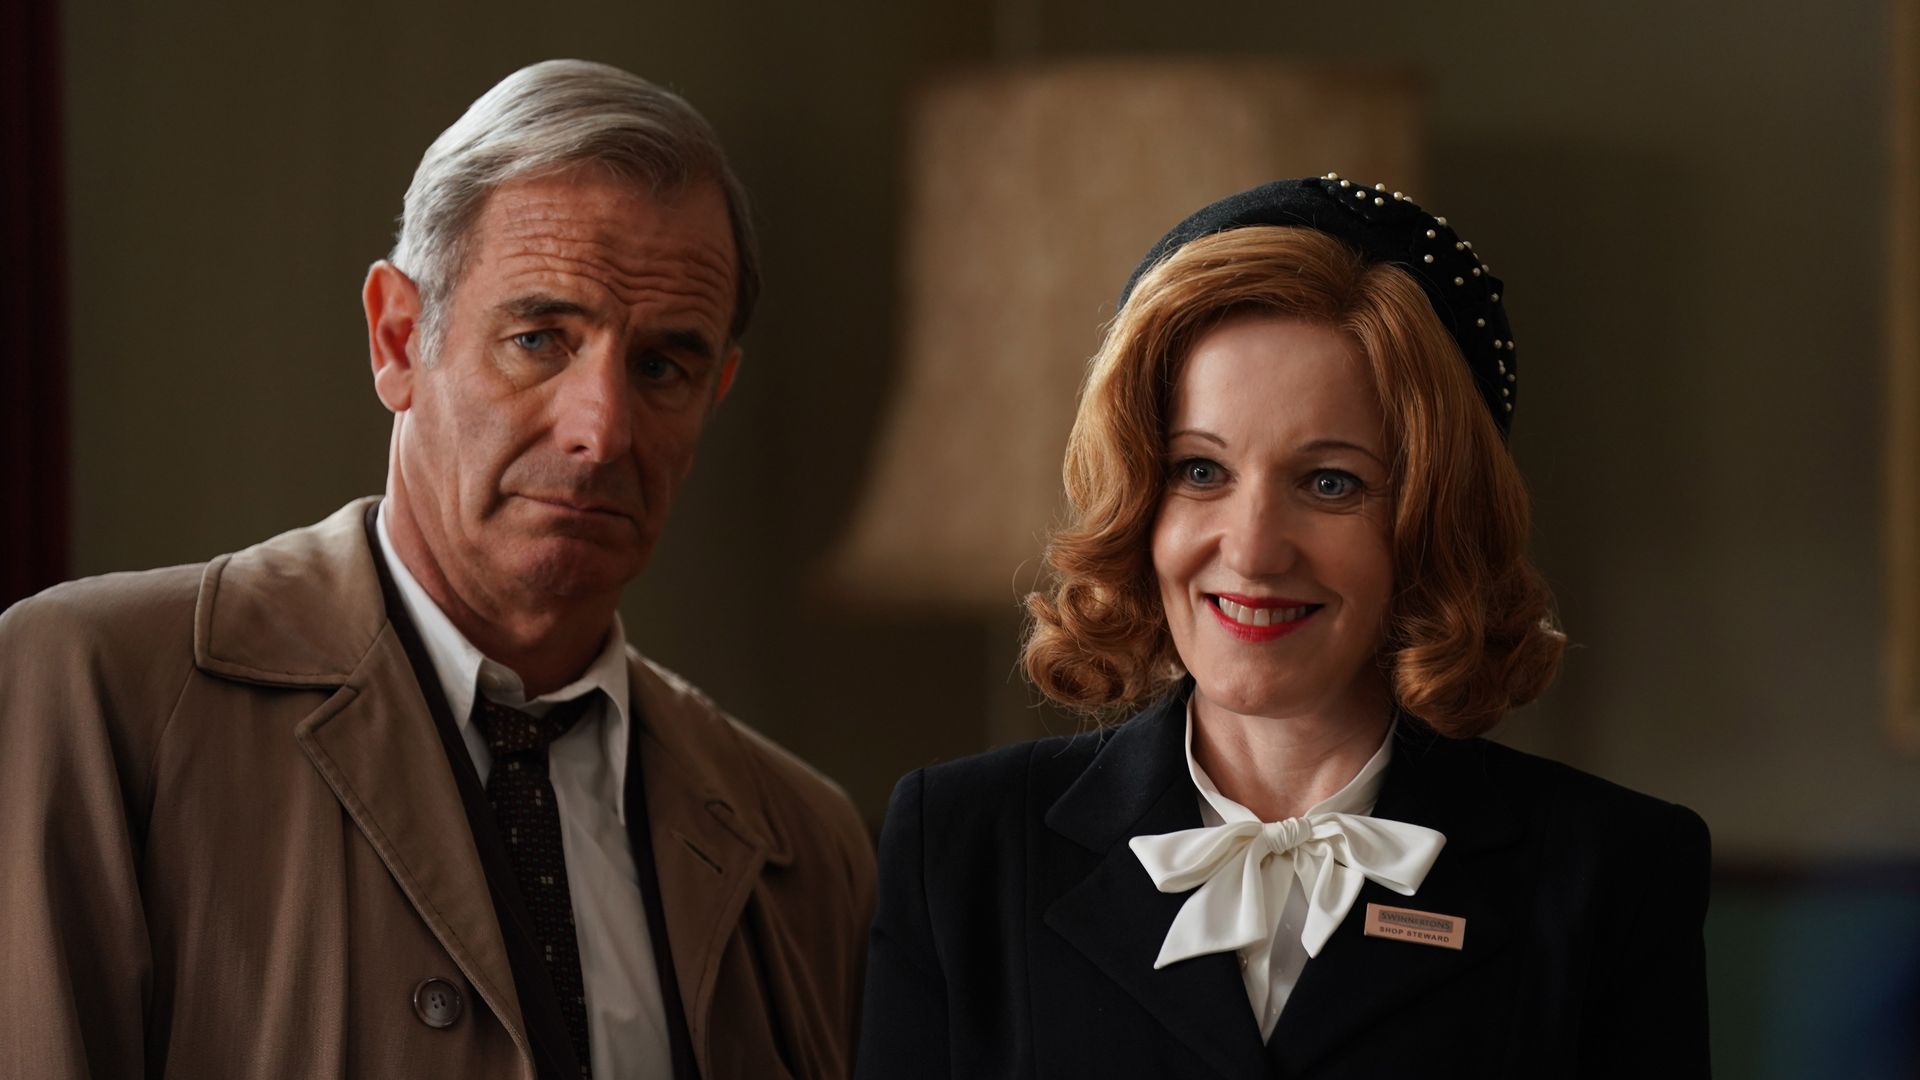 Robson Green as Geordie Keating and Kacey Ainsworth as Cathy Keating in Grantchester